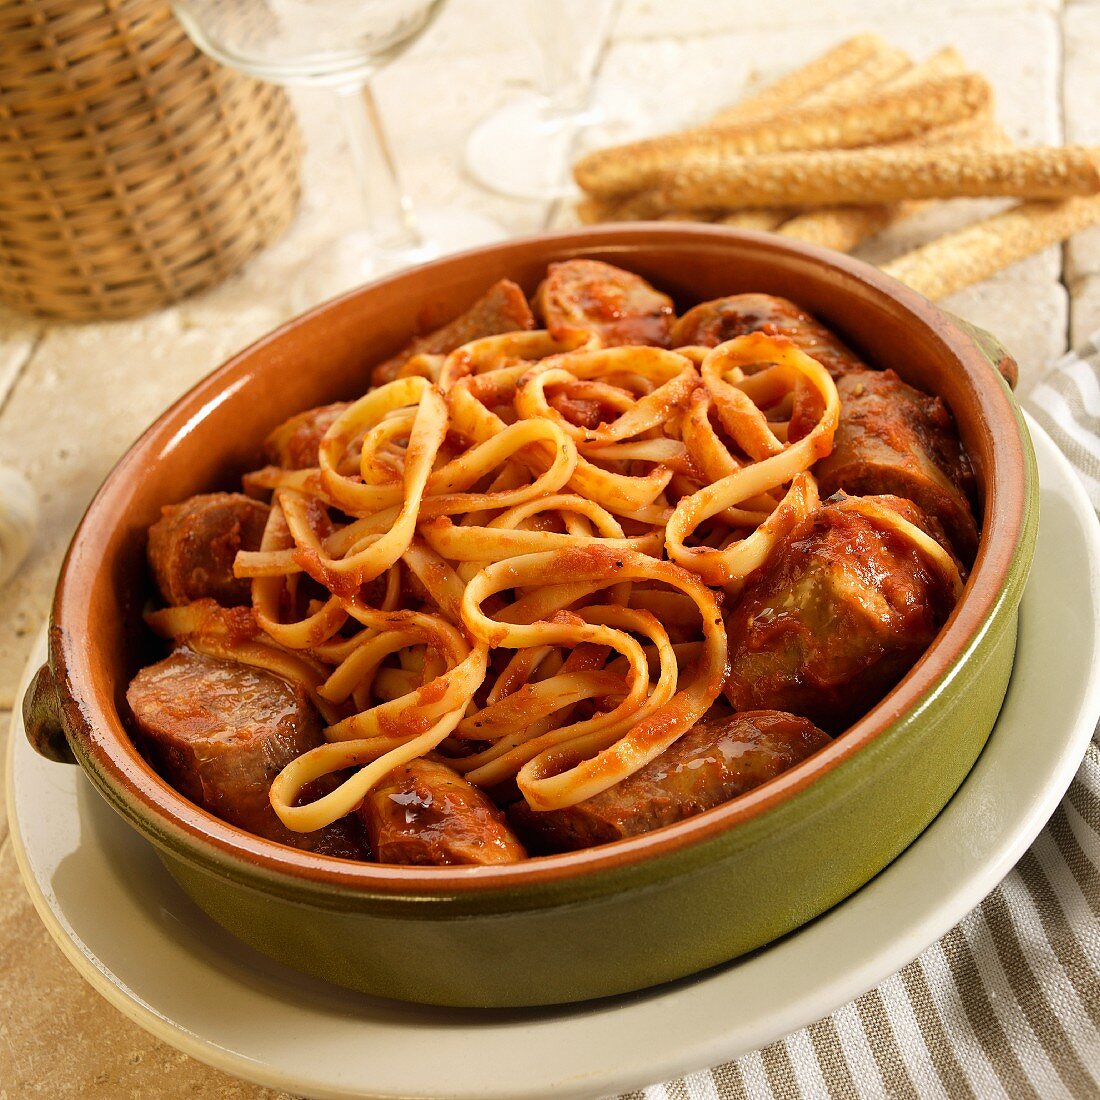 Fettuccine with sausage with marinara sauce in a ceramic bowl